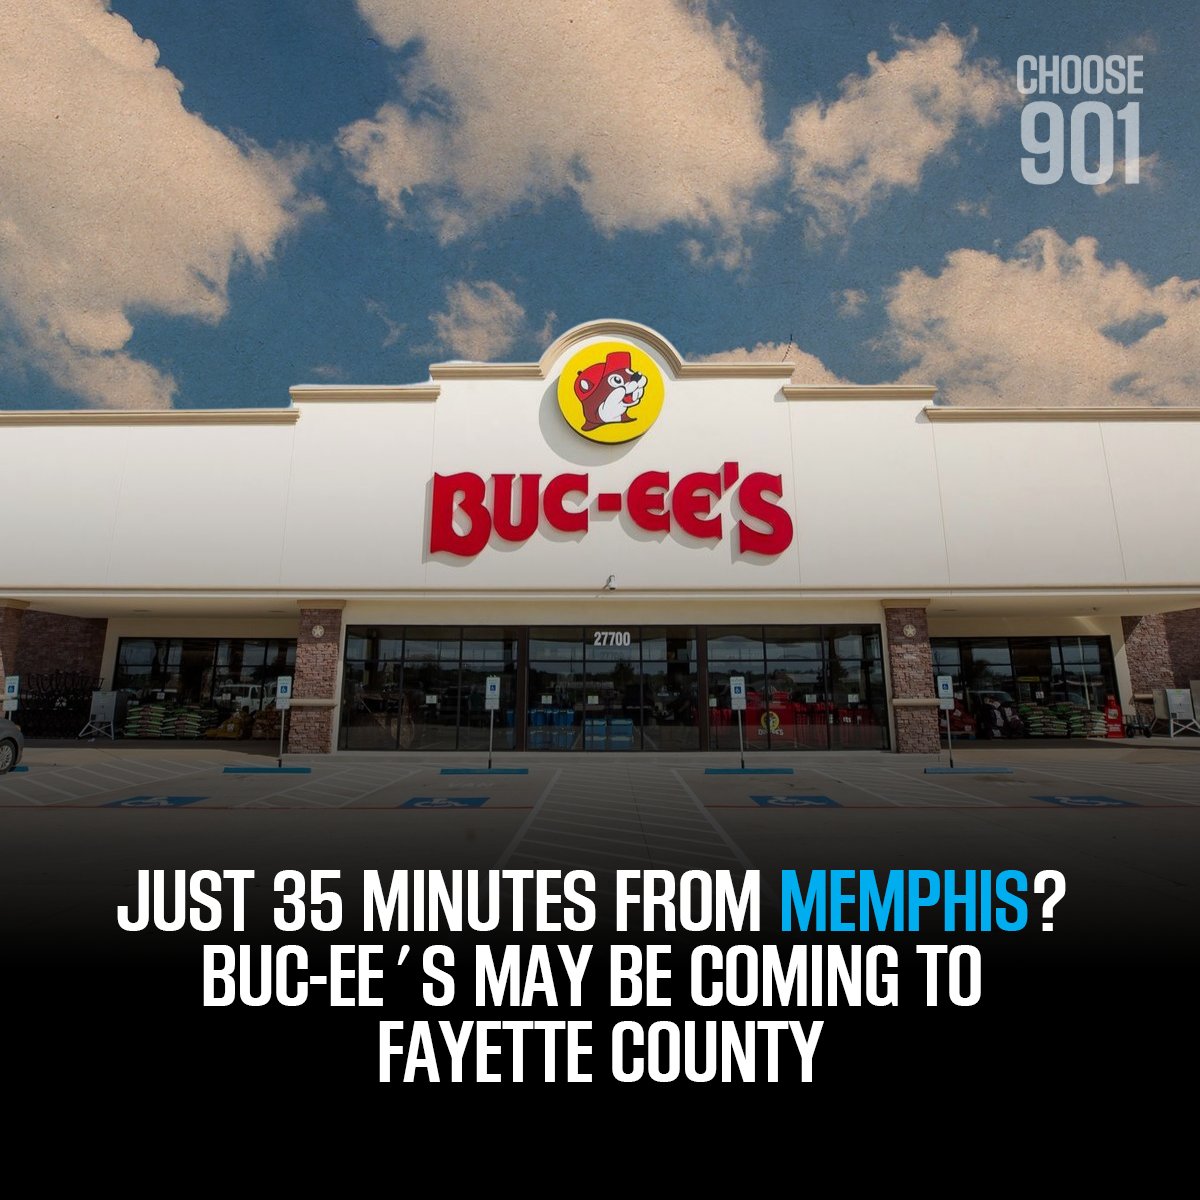 Guess what!? 👀 Buc-ee's might soon open just 35 minutes away in Fayette County! #choose901